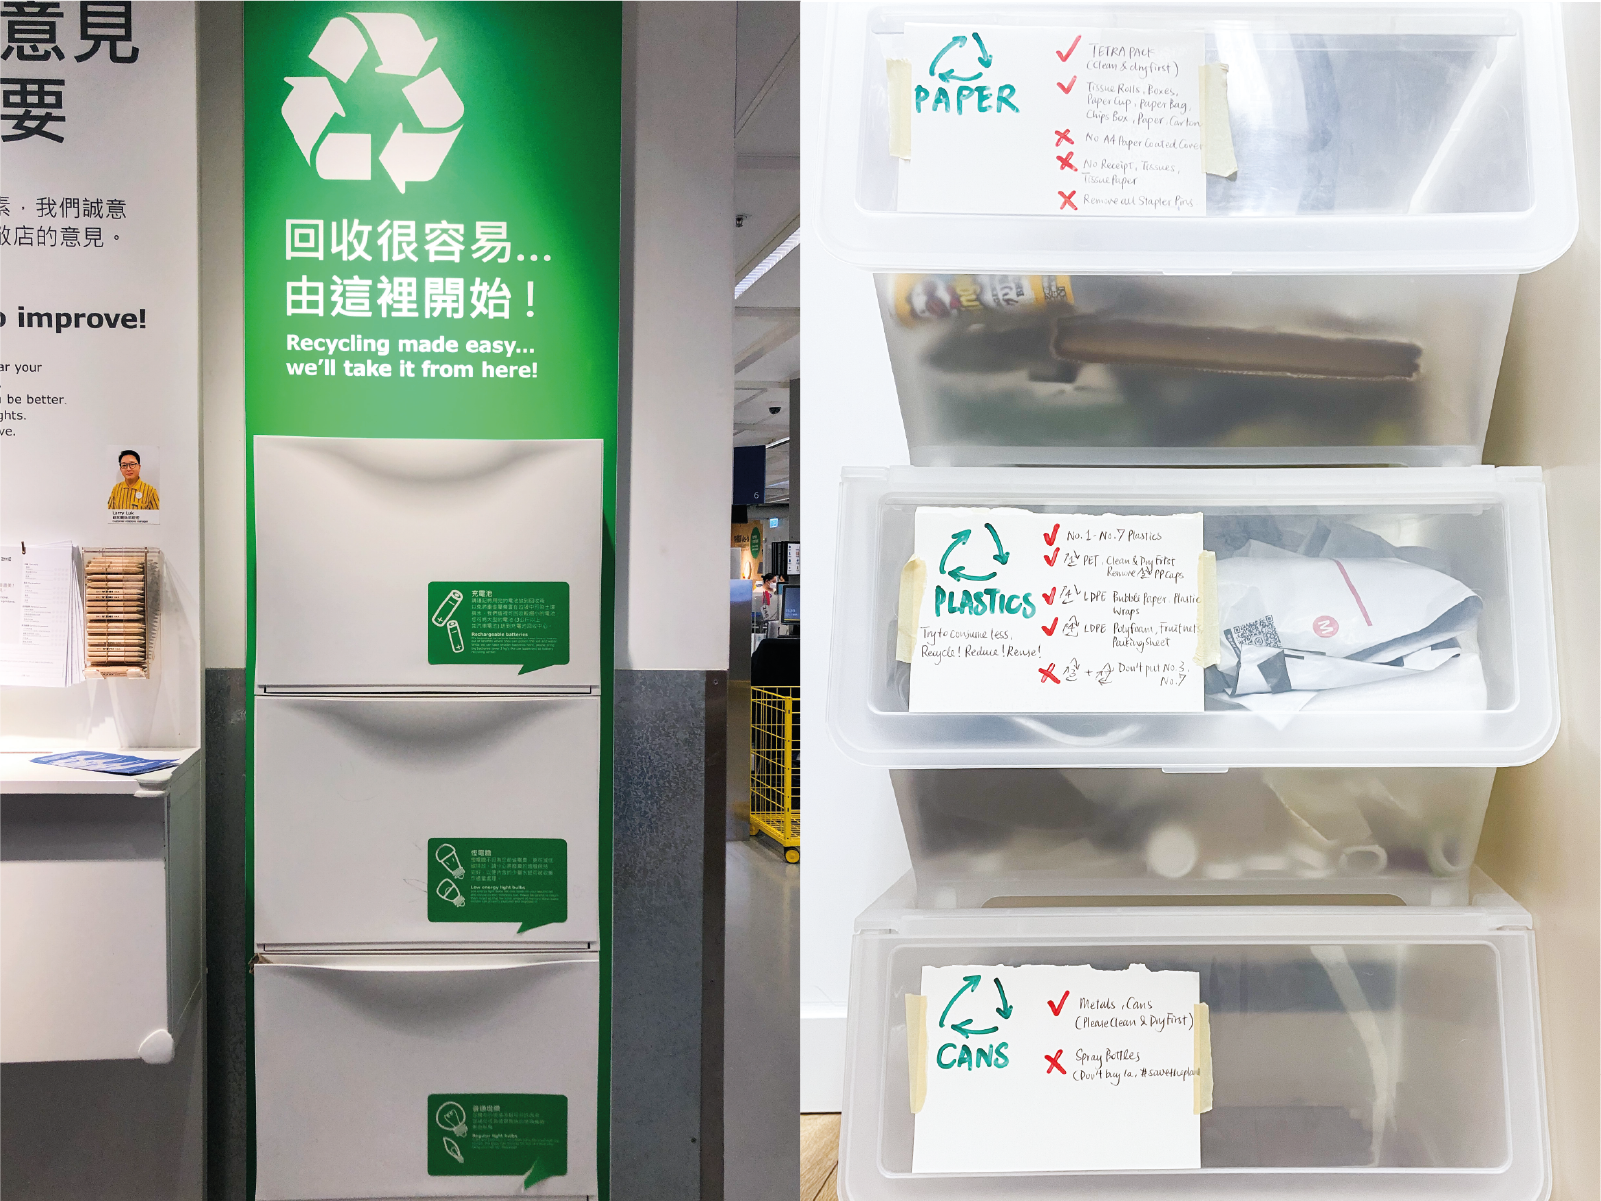 Due to the space limitation in Hong Kong, IKEA has showcased the inspiration of organizing the recyclables at home. Meanwhile, at INVISIBLE COMPANY’s office, we have setup the recycling bin, after sorting the recyclables, we will bring to the green community center for recycling. 